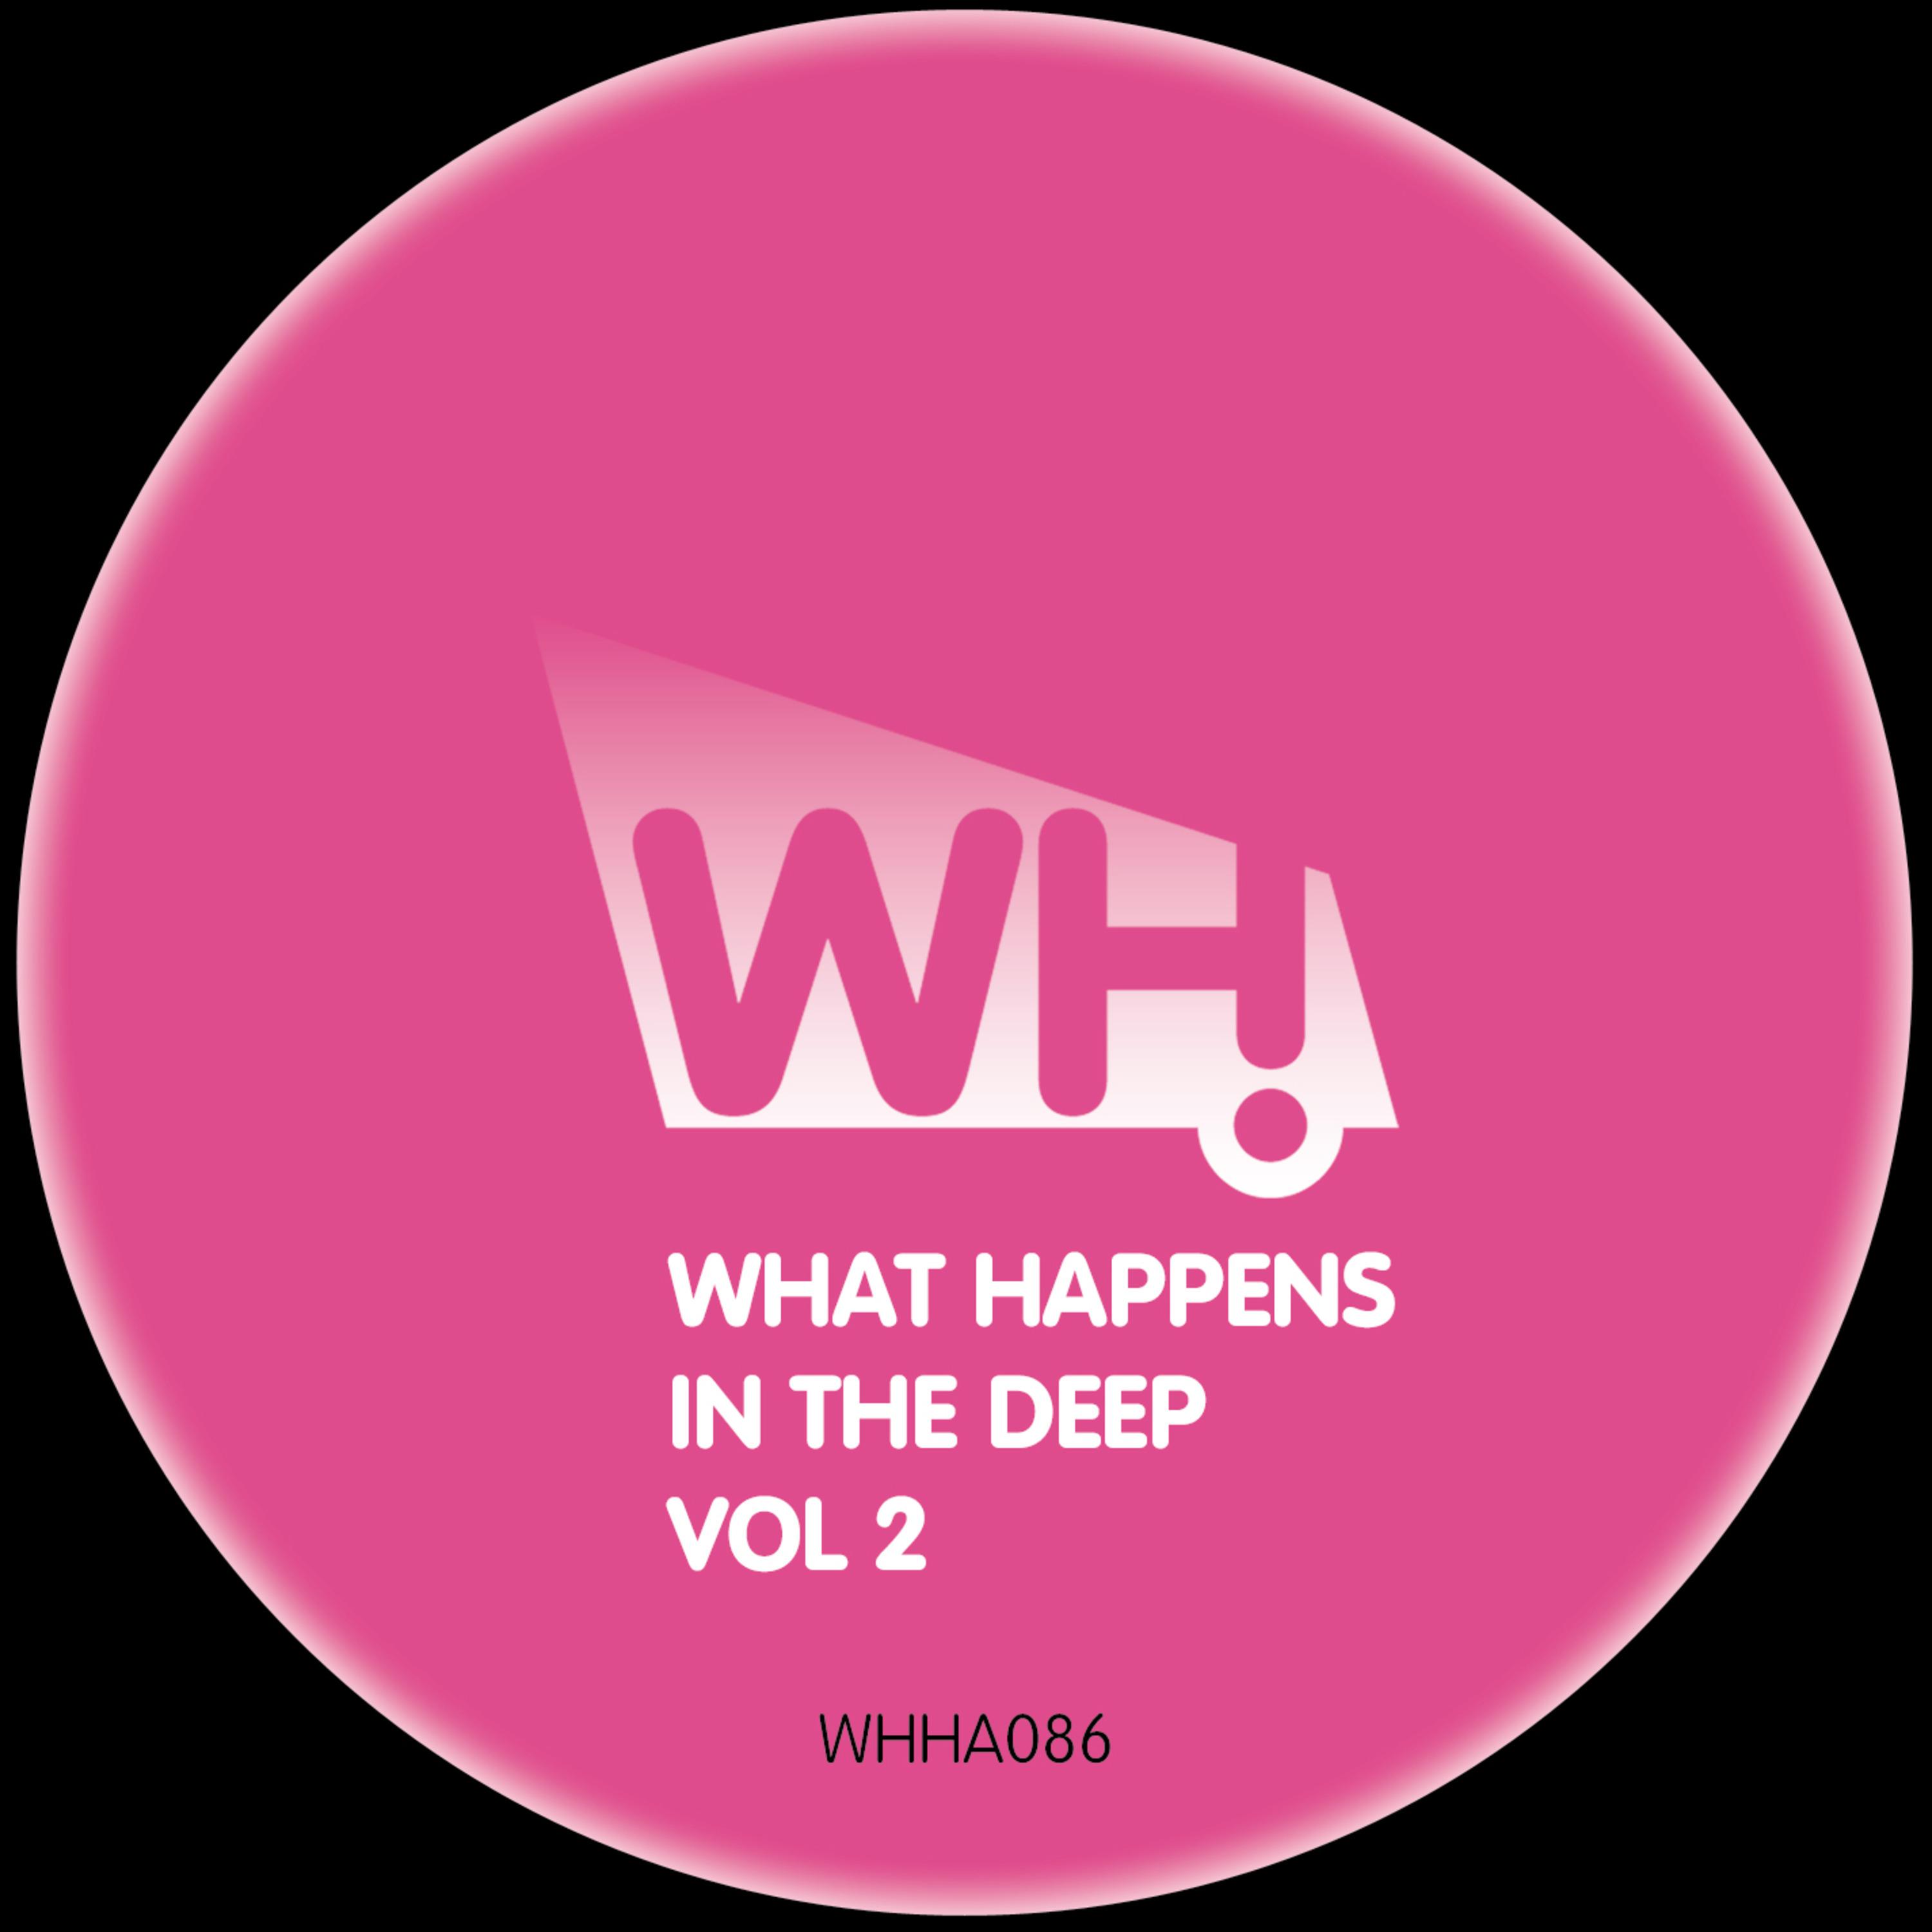 What Happens in the Deep Vol 2